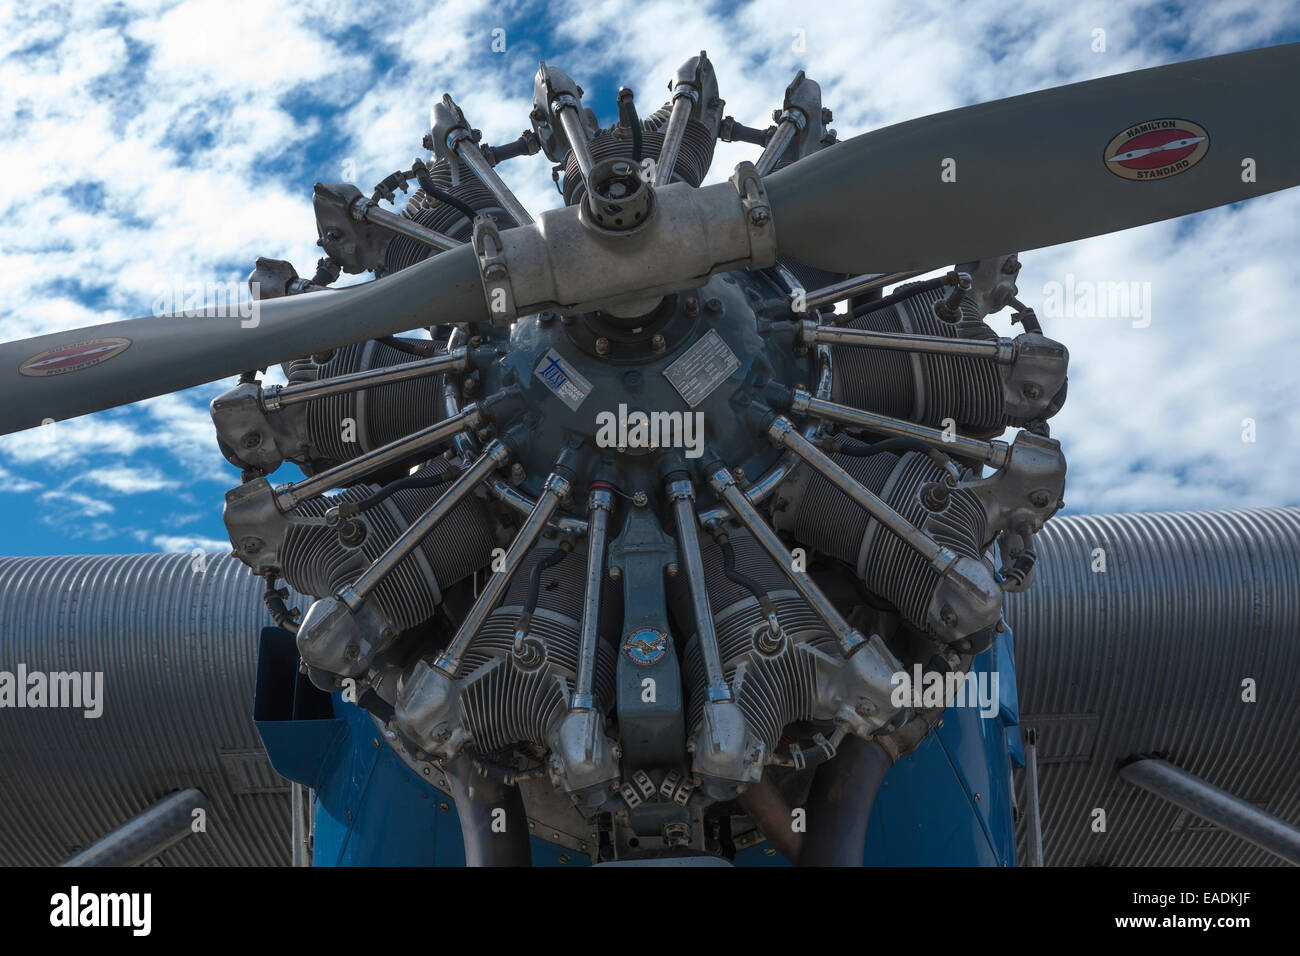 Radial aircraft engine and propeller of Fort Tri-motor vintage airliner Stock Photo